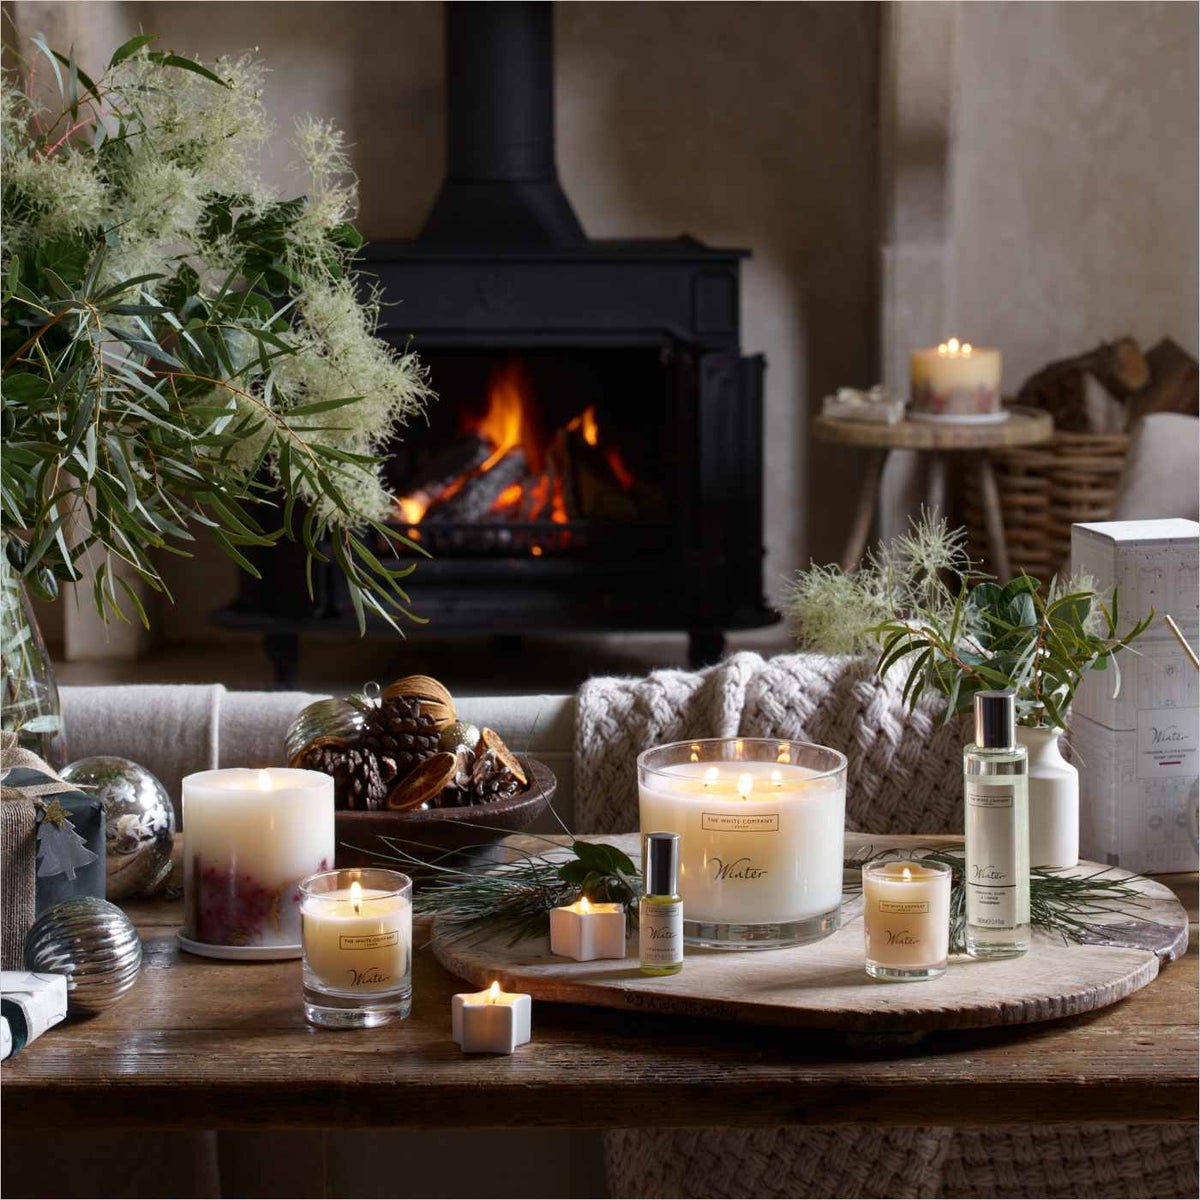 Give a timeless and meaningful gift this year with these finds from The White Company’s festive collection